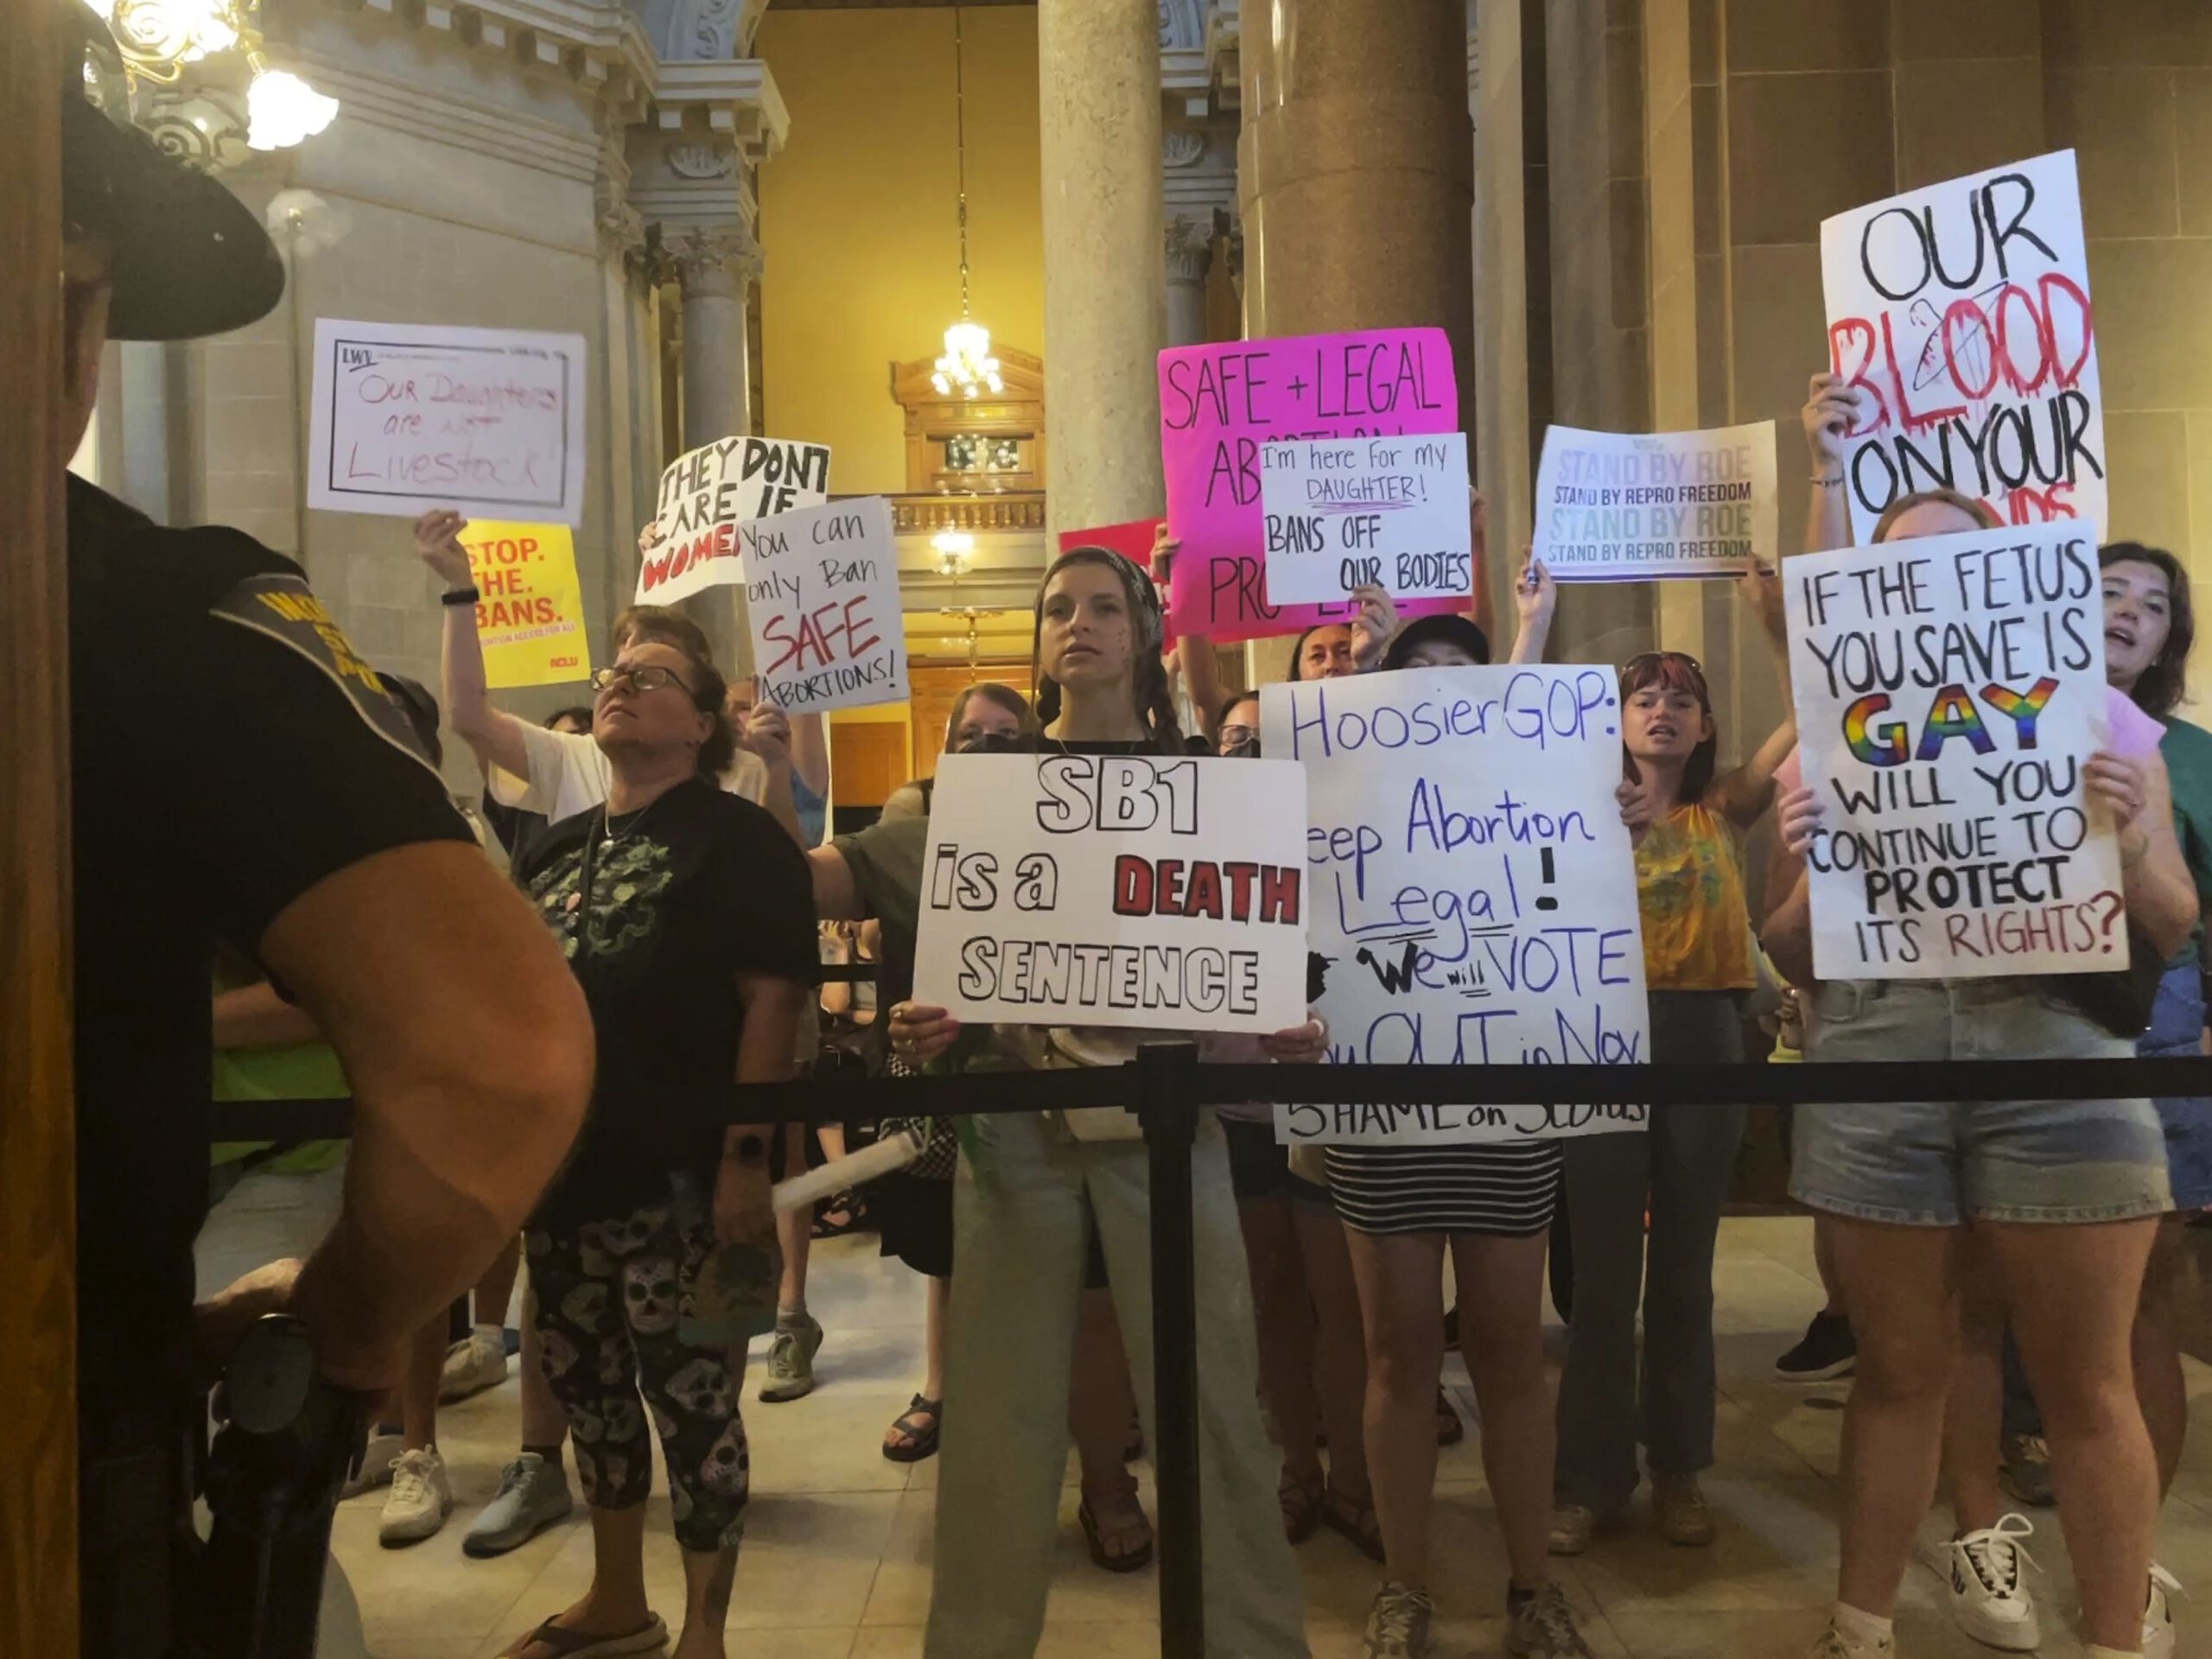 Abortion-rights protesters fill Indiana Statehouse corridors and demonstrate outside legislative chambers, Friday, Aug. 5, 2022, as lawmakers vote to concur on a near-total abortion ban, in Indianapolis. (AP Photo/Arleigh Rodgers)